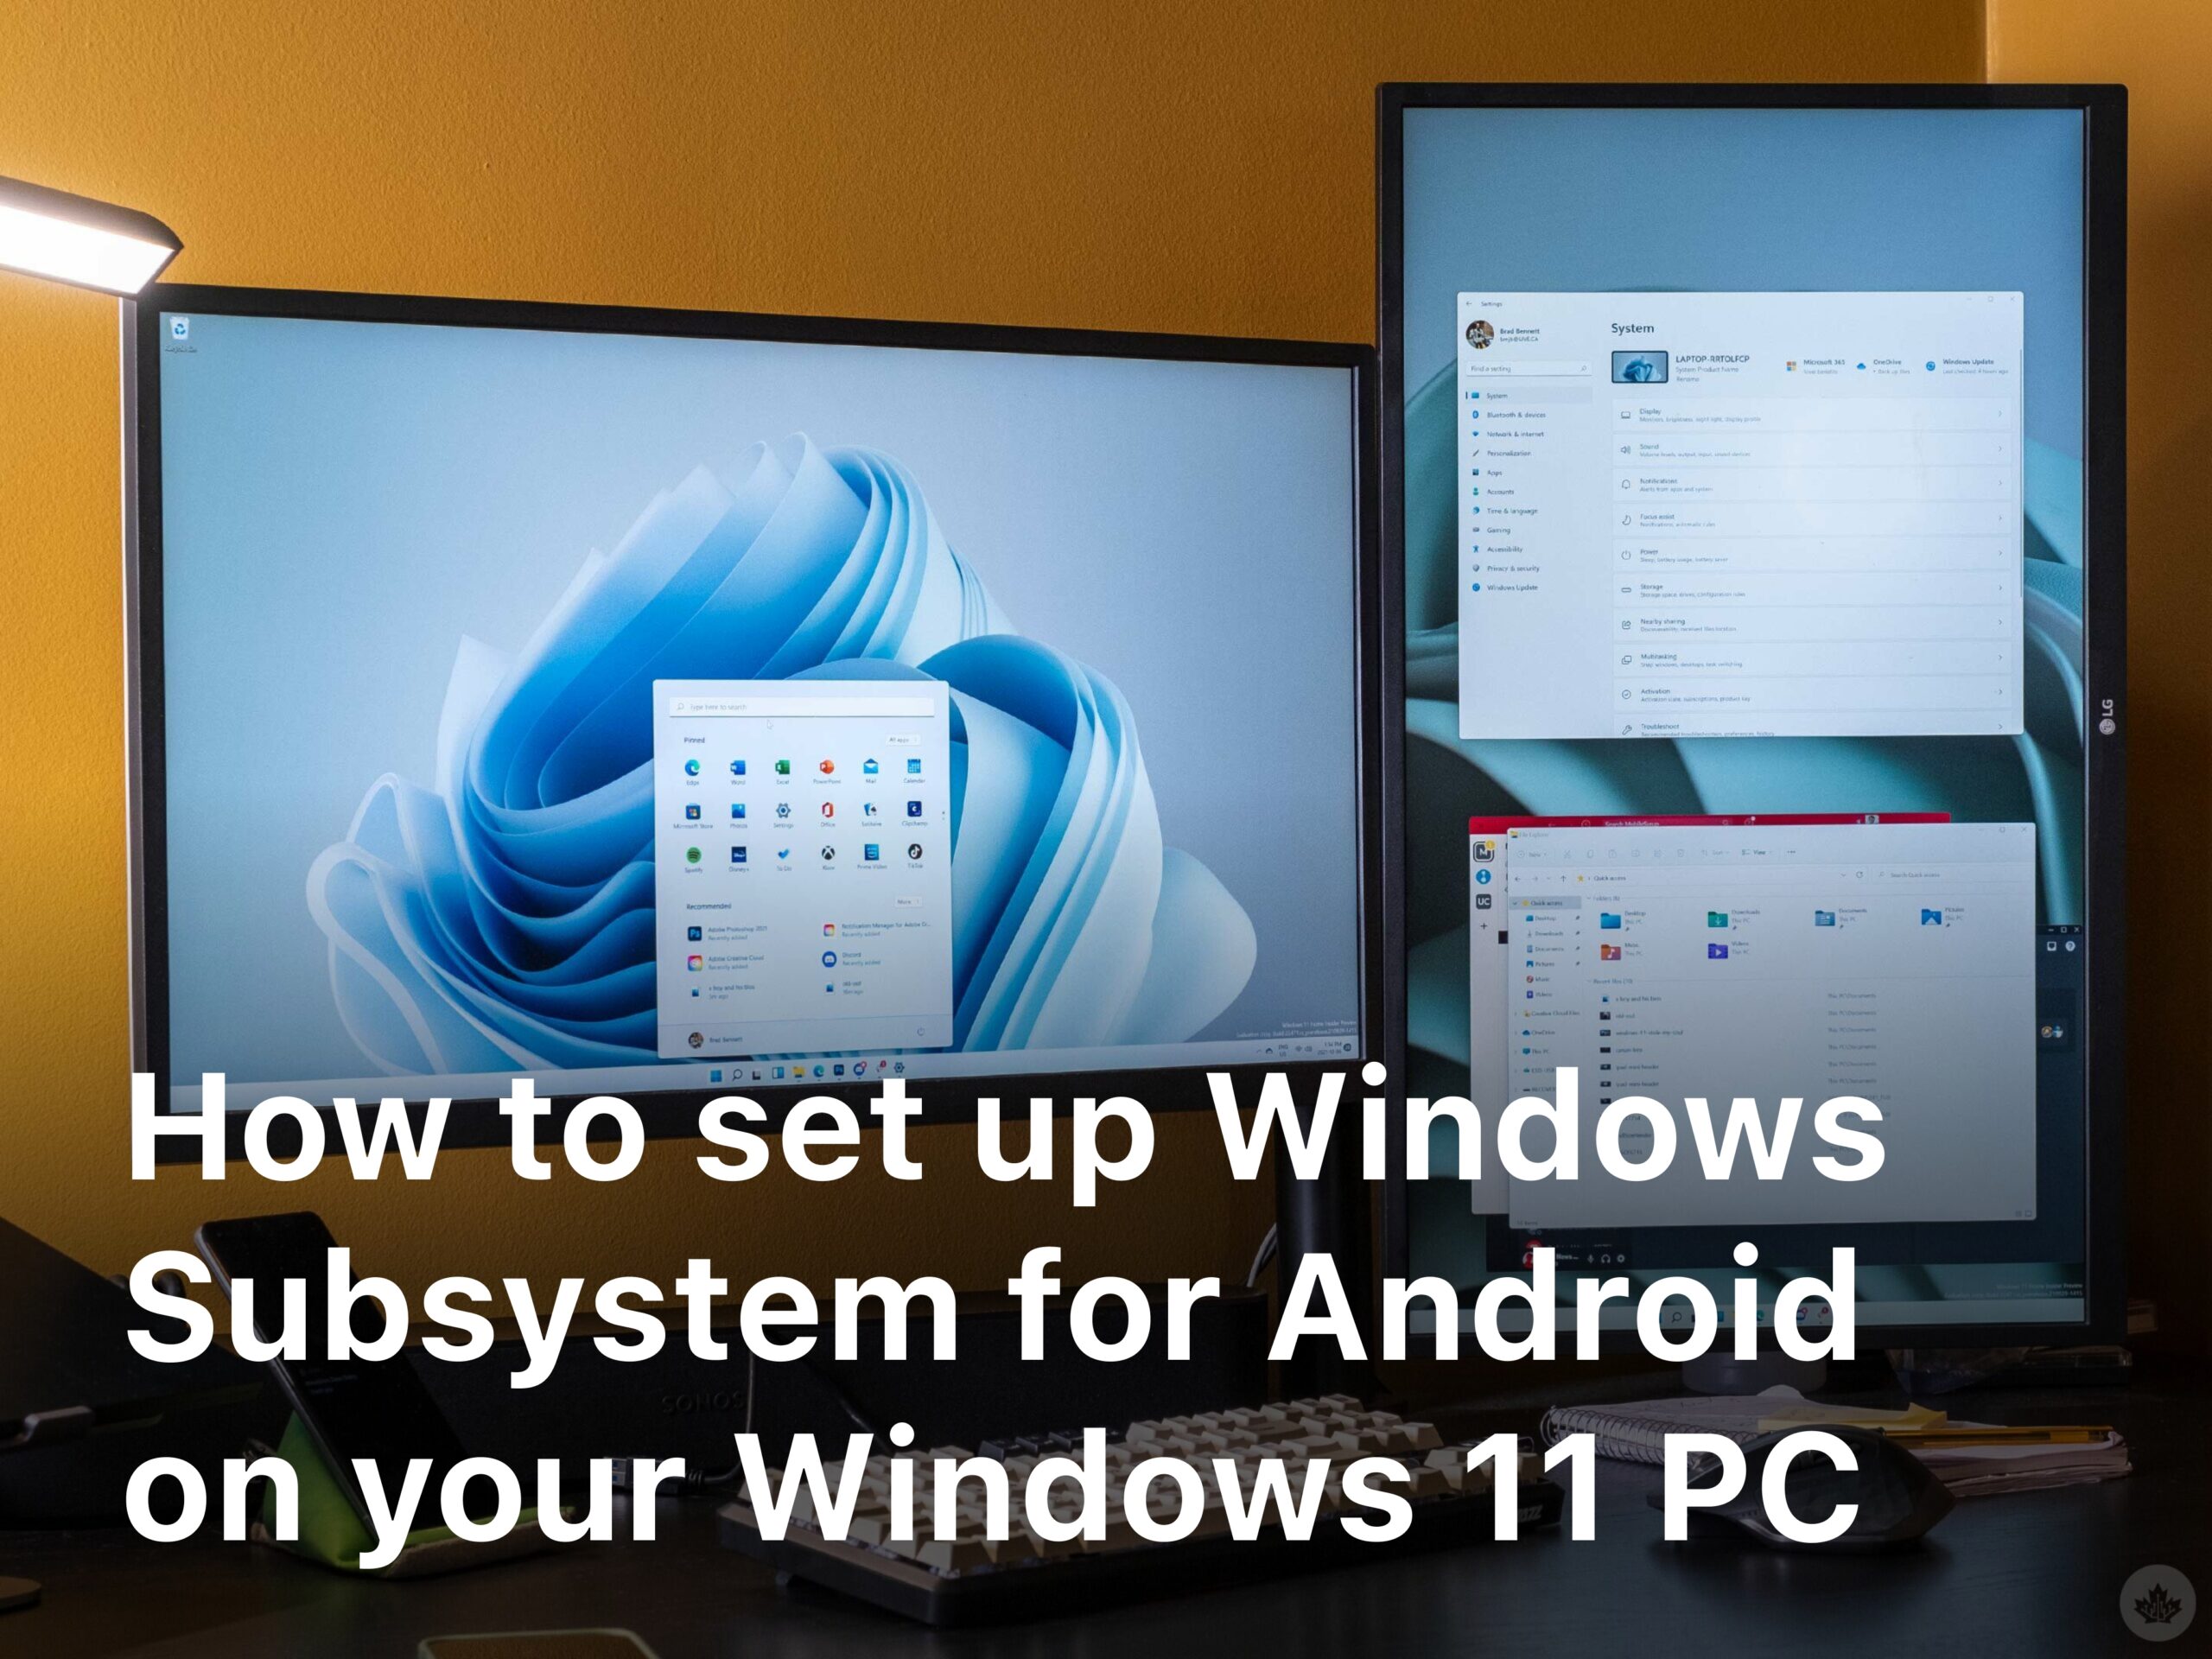 Windows subsystem for Android